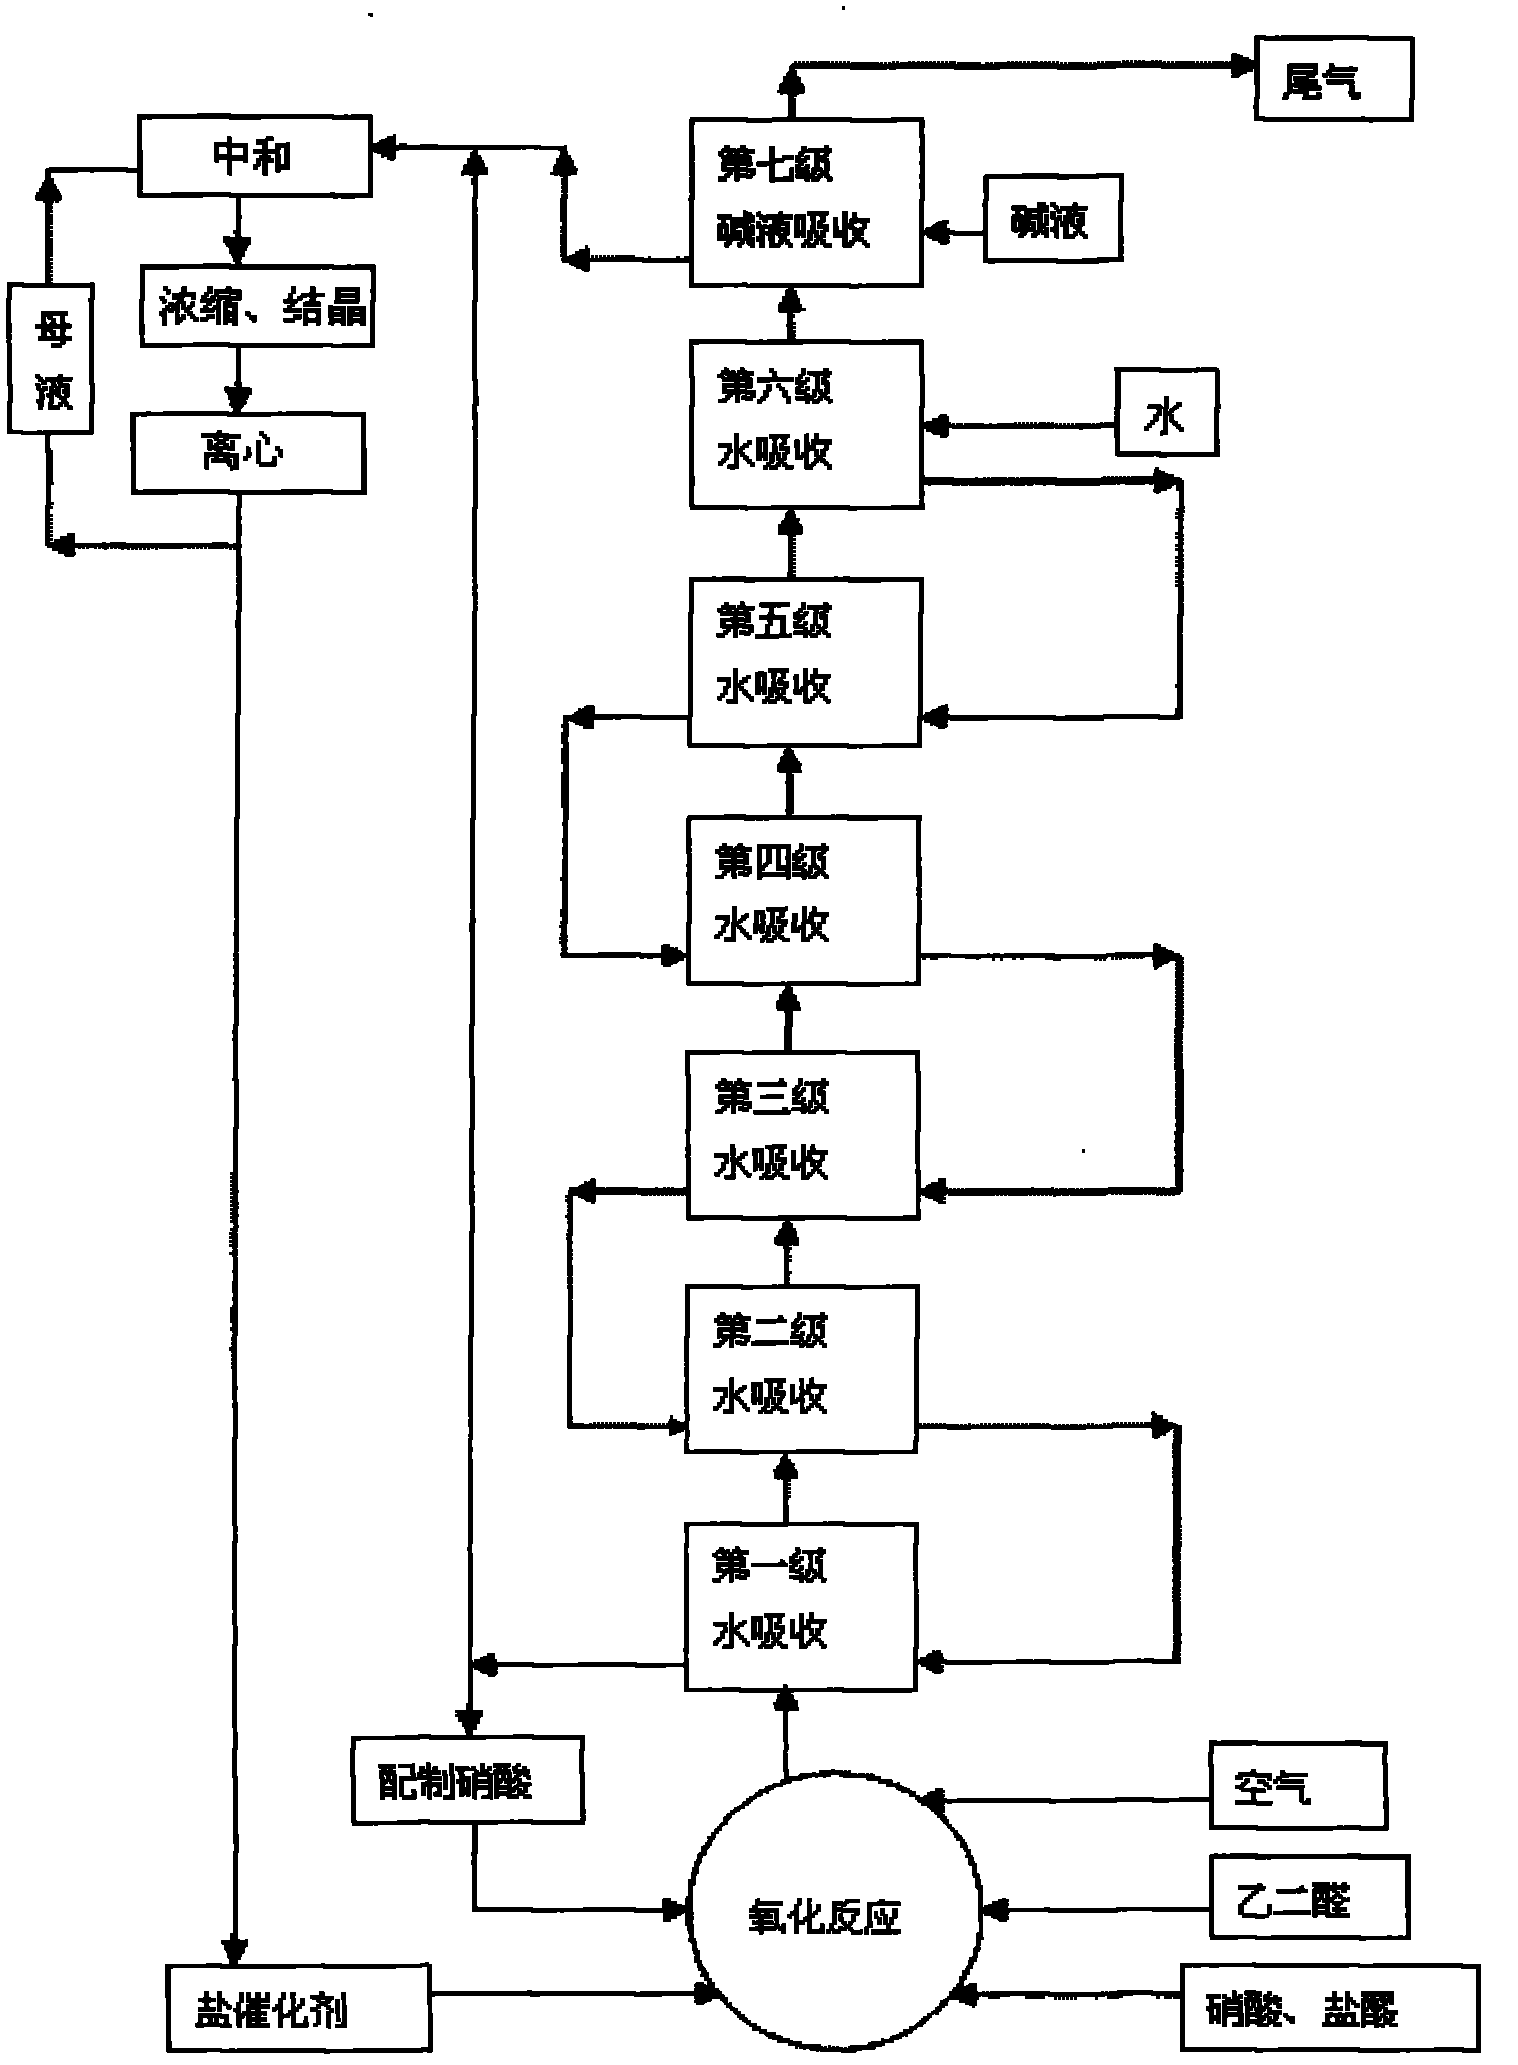 Treatment method and treatment system of tail gas from glyoxylic acid production by nitric acid oxidation of glyoxal